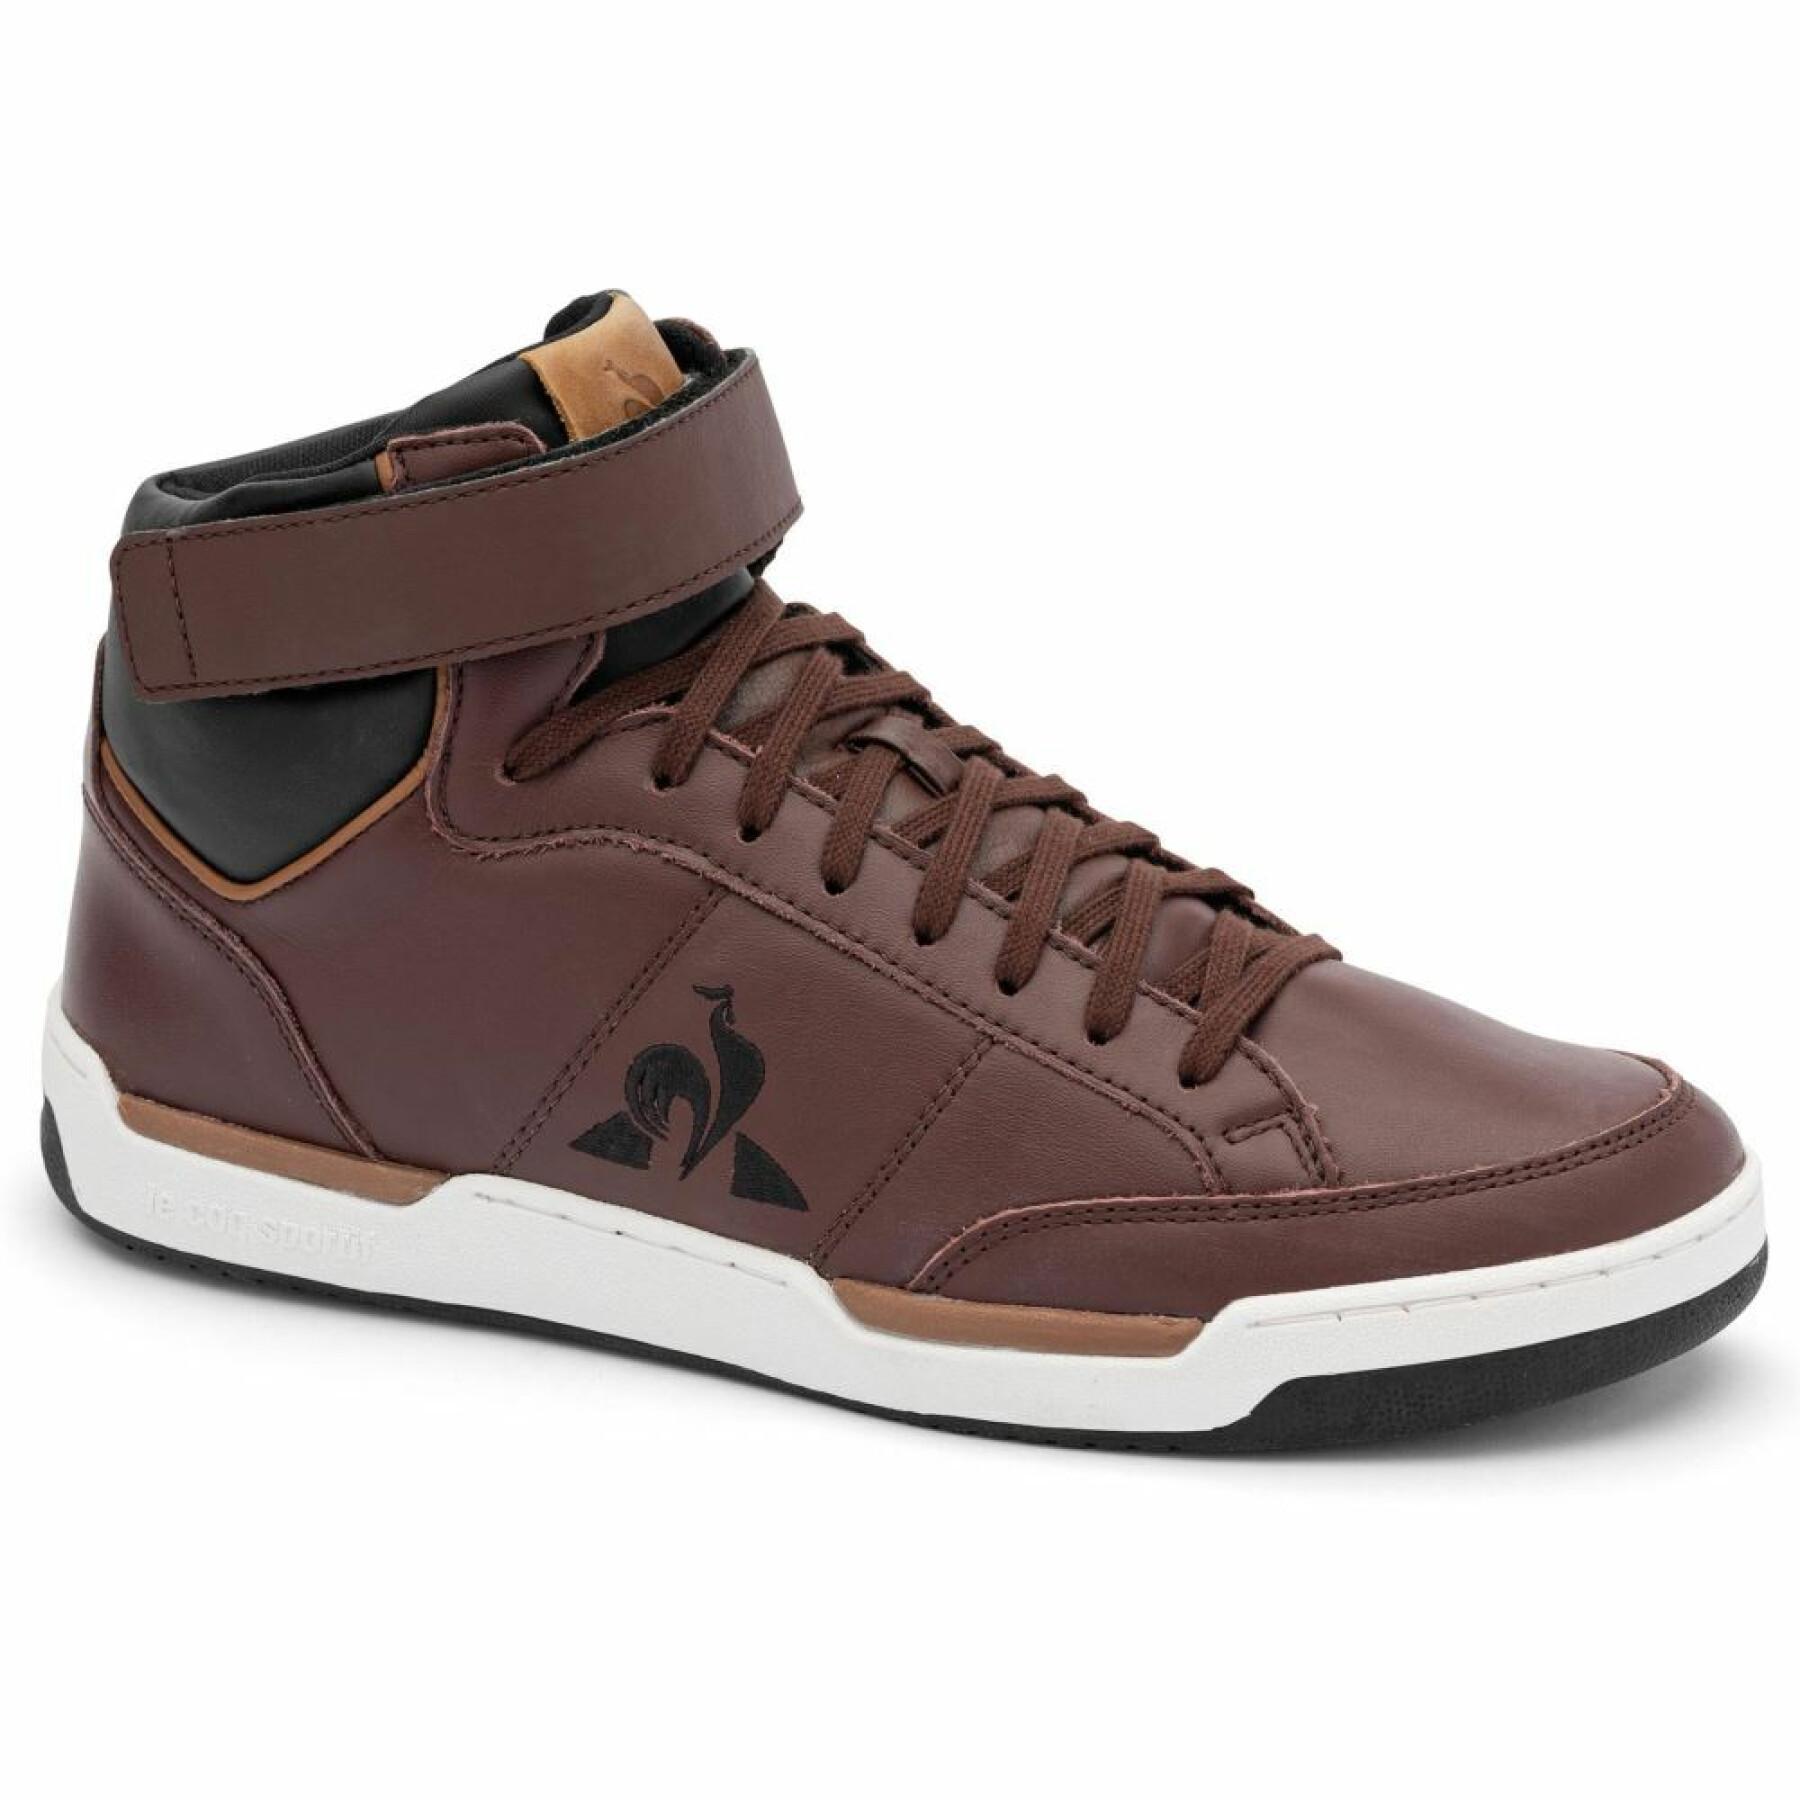 Formadores Le Coq Sportif Field Leather Mix